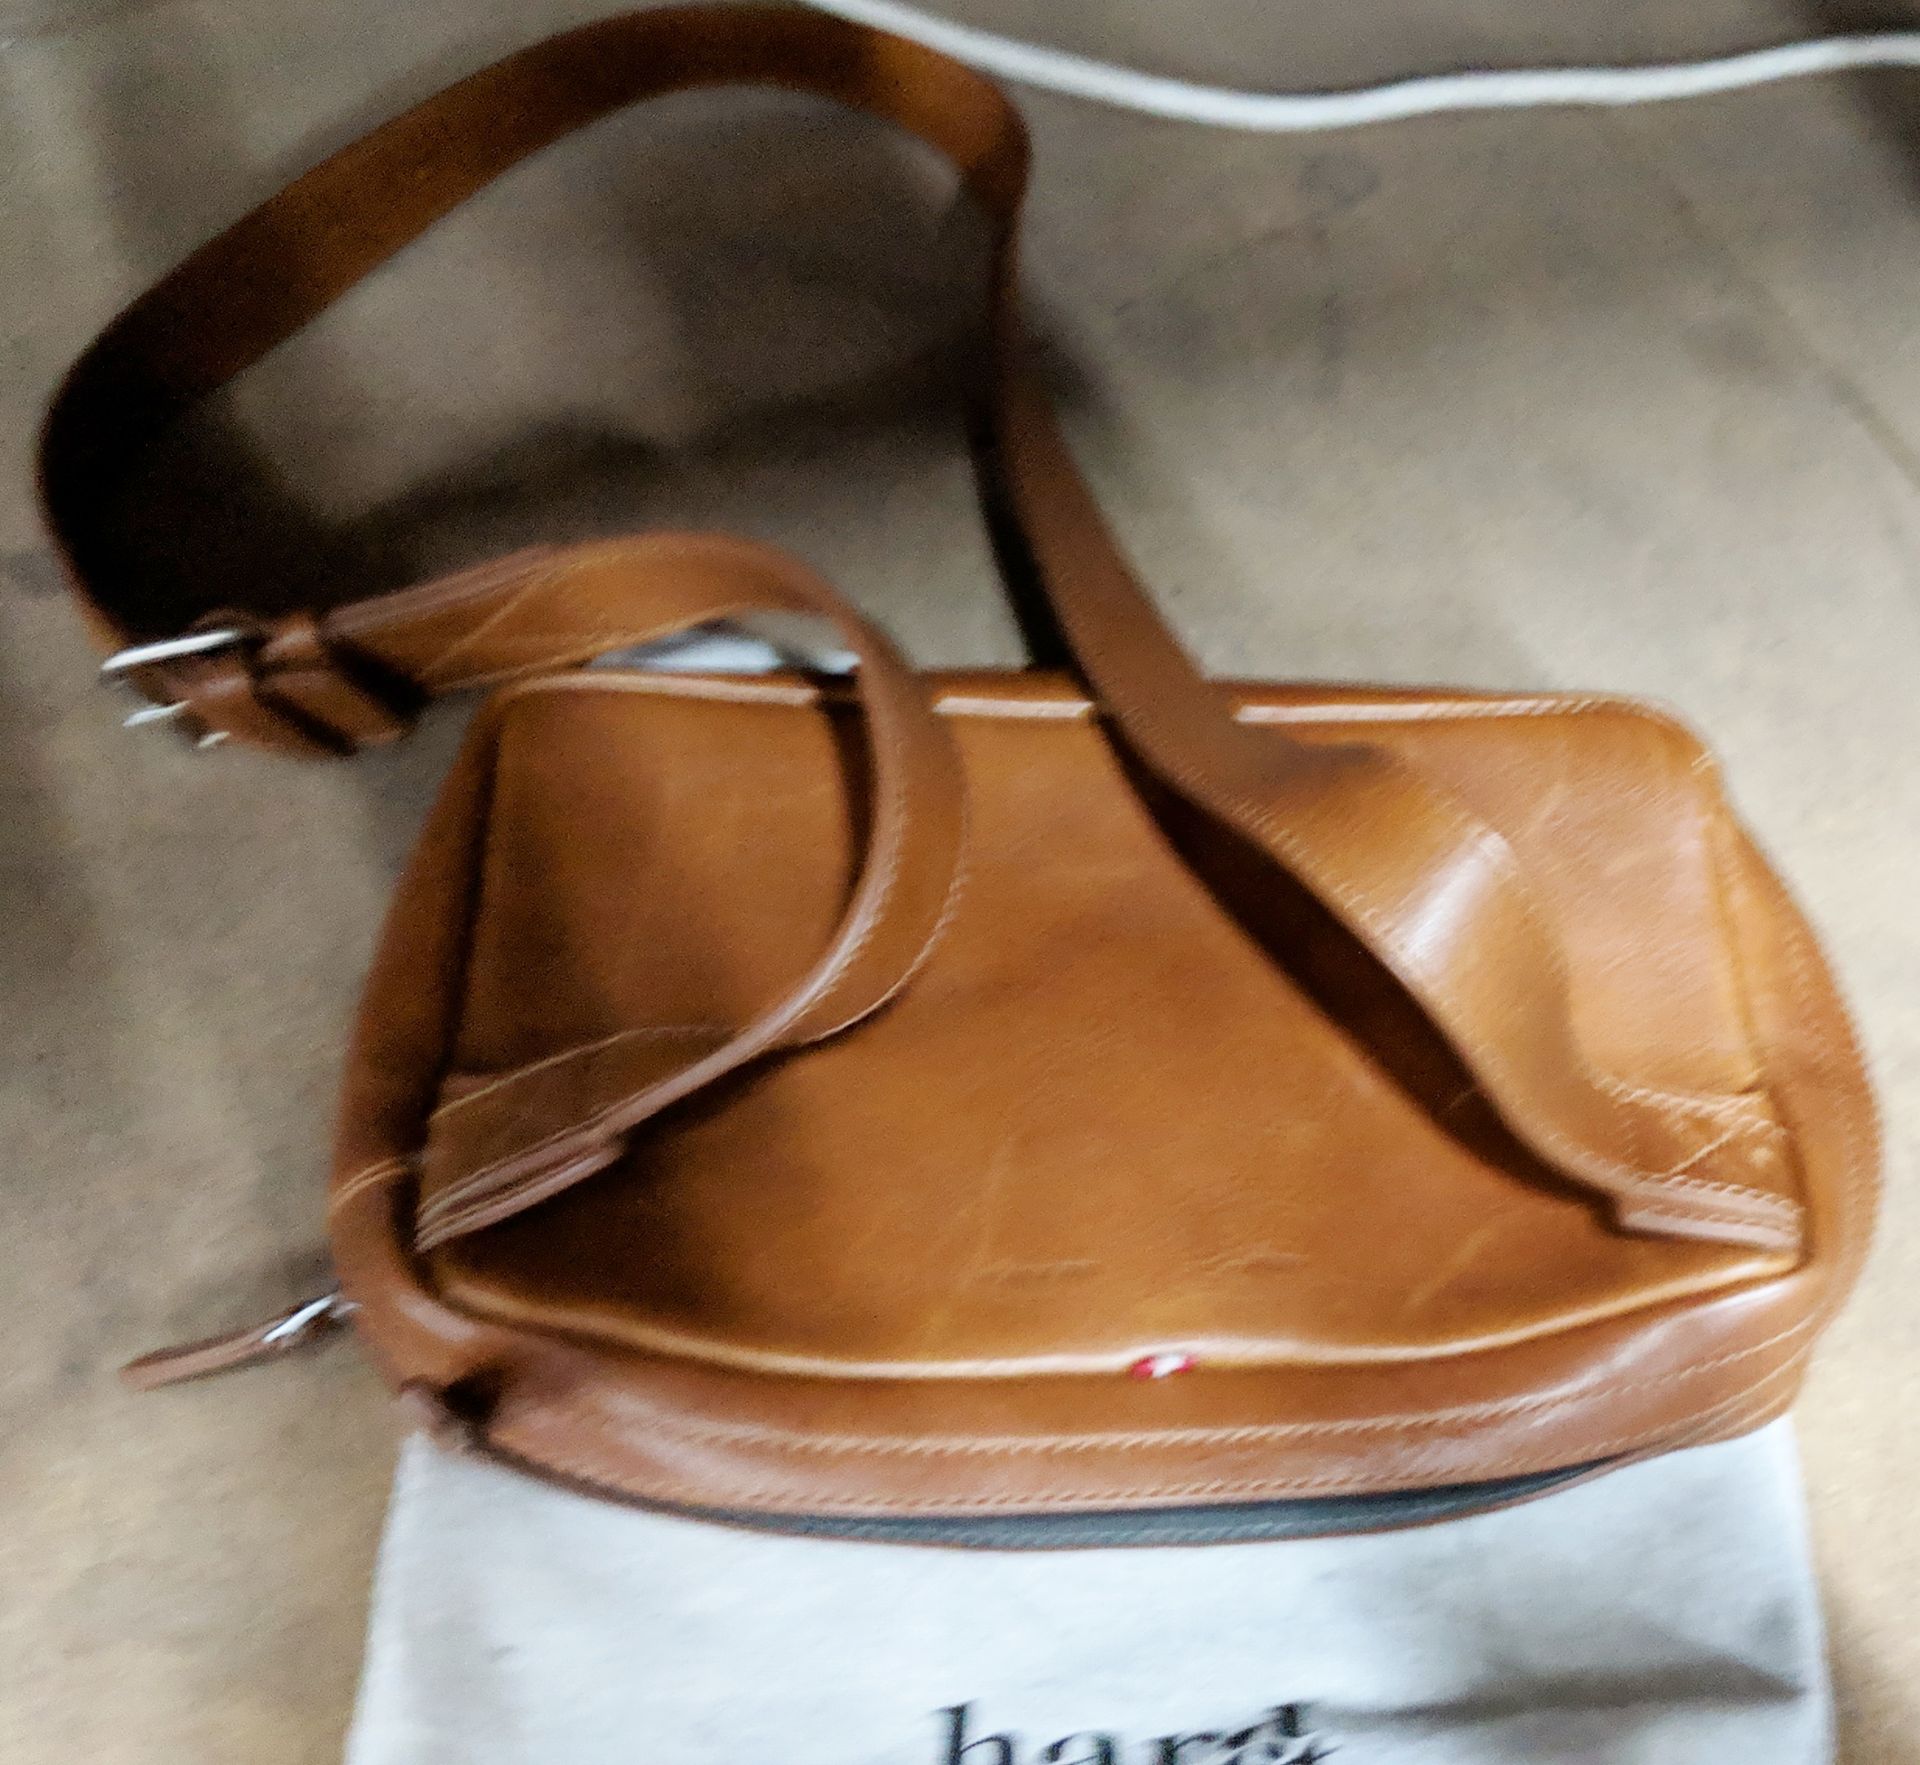 Hard Graft leather "Phone Pack Classic" man bag in brown leather with adjustable strap, including - Image 7 of 8